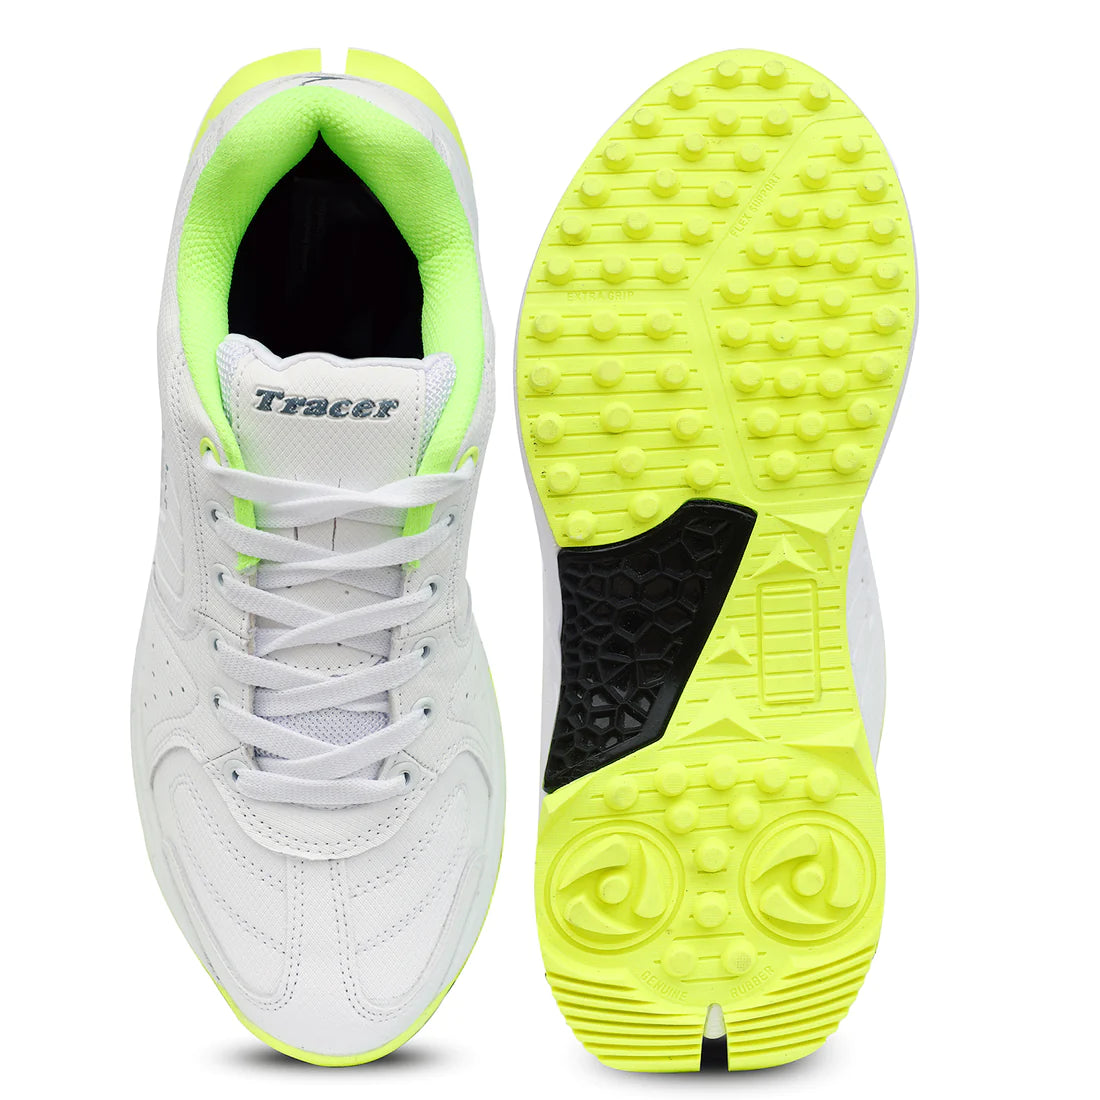 Tracer T-Spinner 193 Rubber Studs Cricket Shoes - White/Green